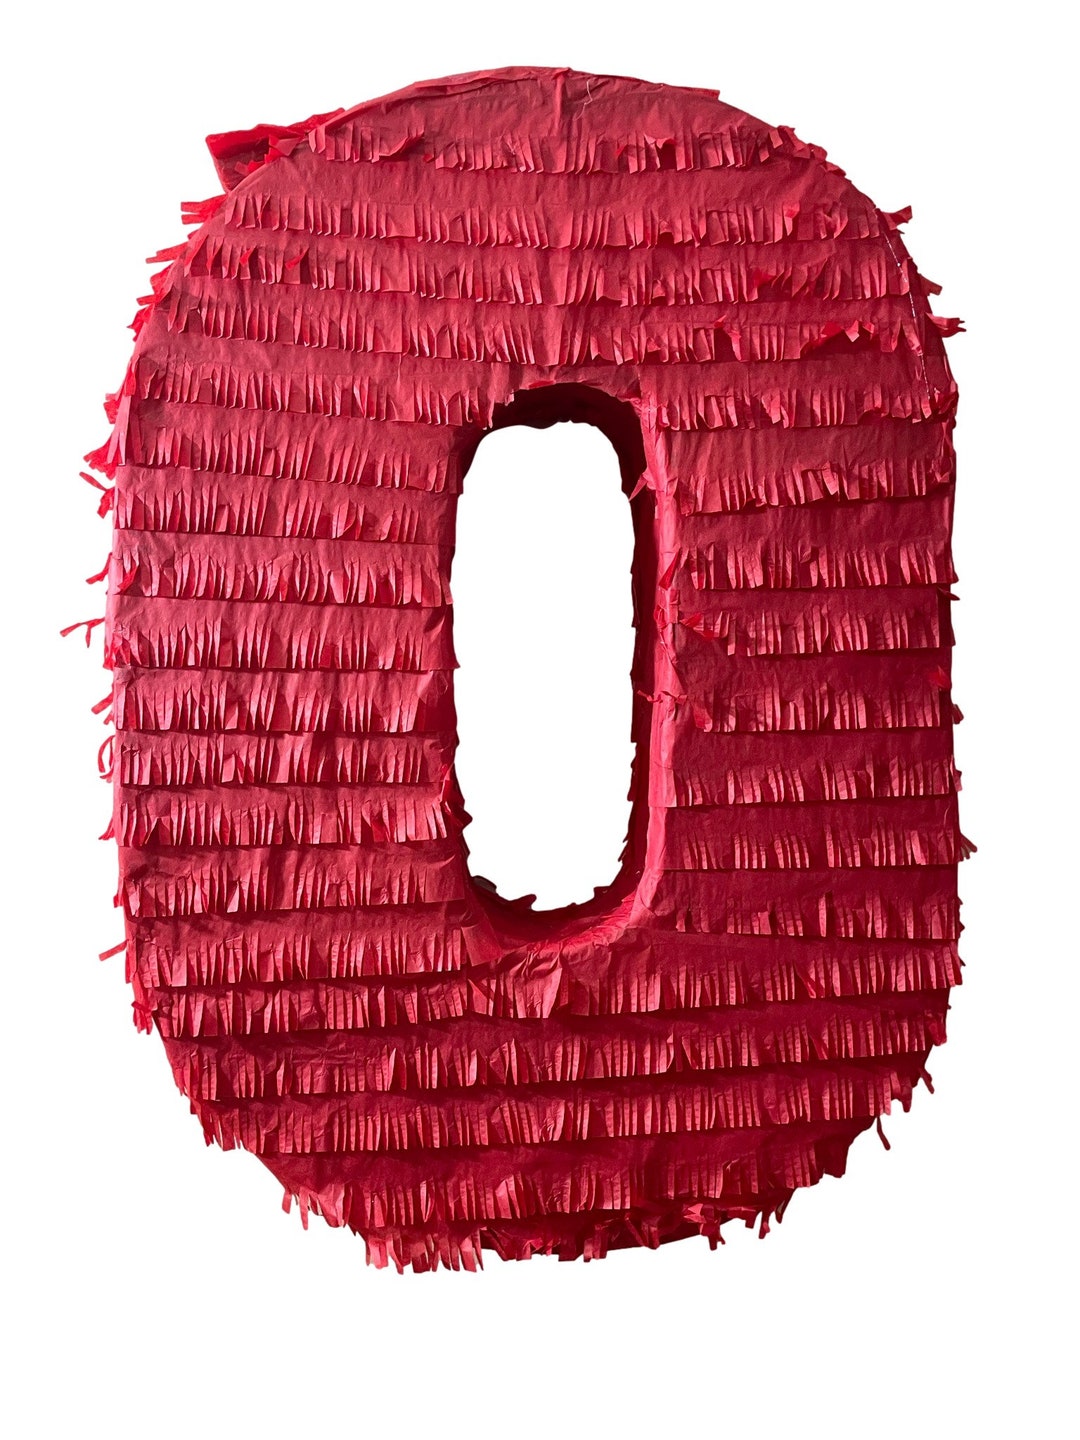 Number One Pinata Mexican Theme Colorful available Numbers 1-9